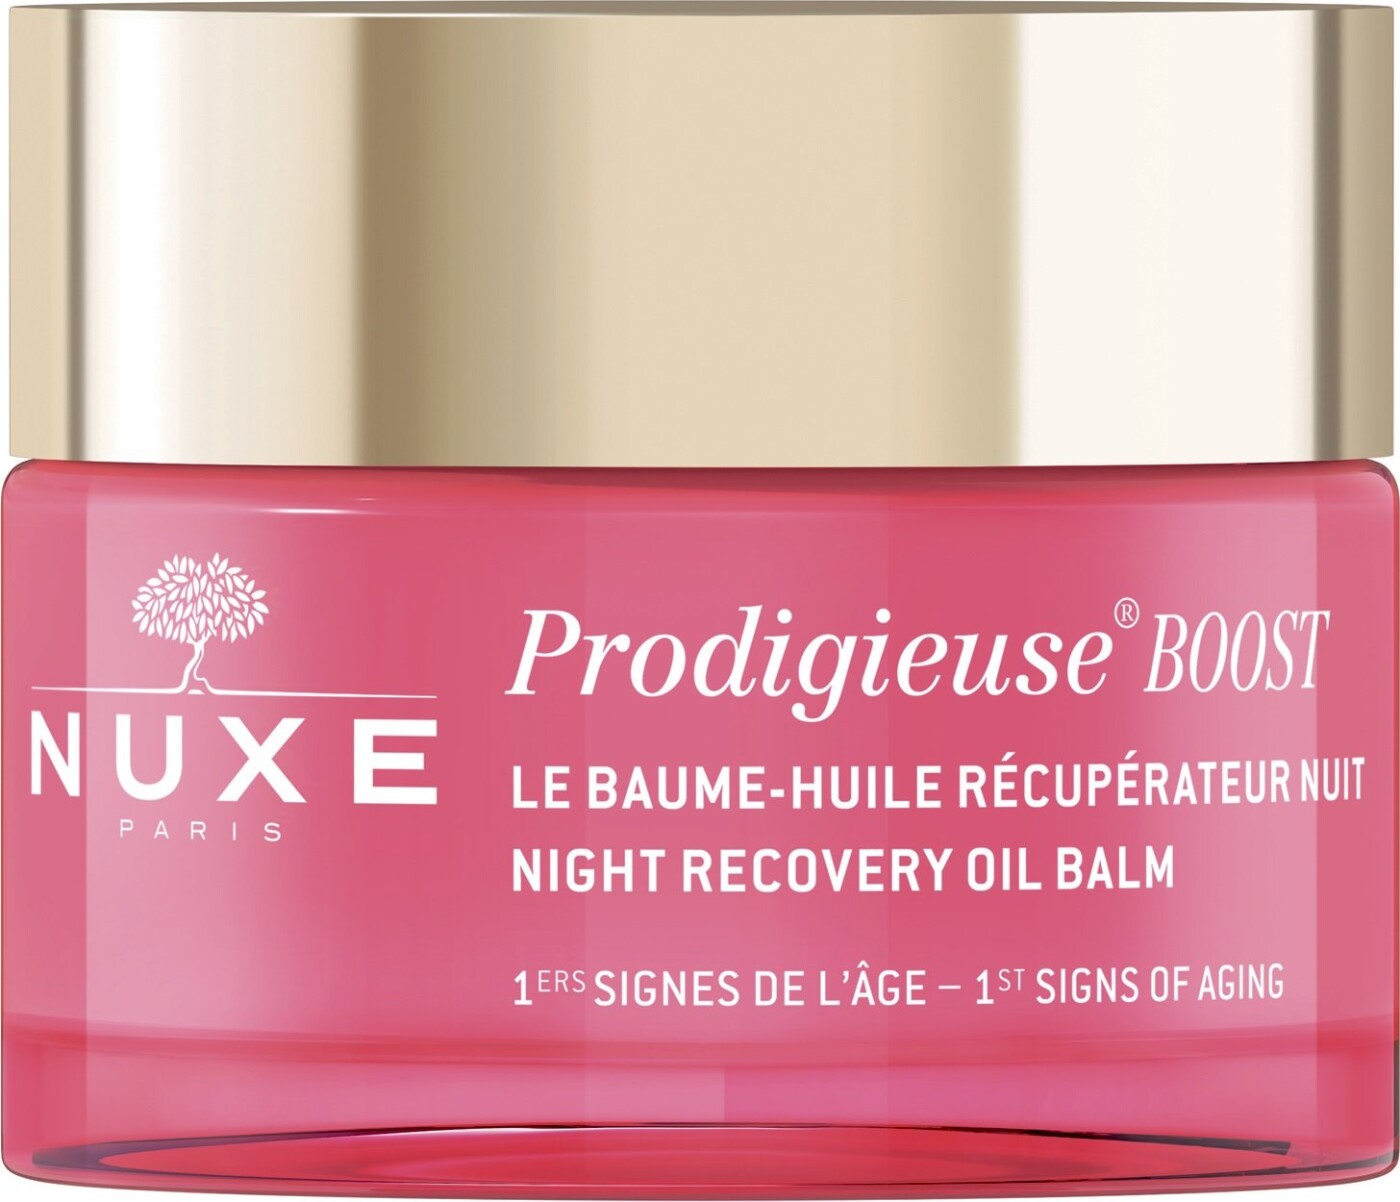 Billede af Nuxe Natcreme - Crème Prodigieuse Boost Night Recovery Oil Balm 50 Ml hos Gucca.dk